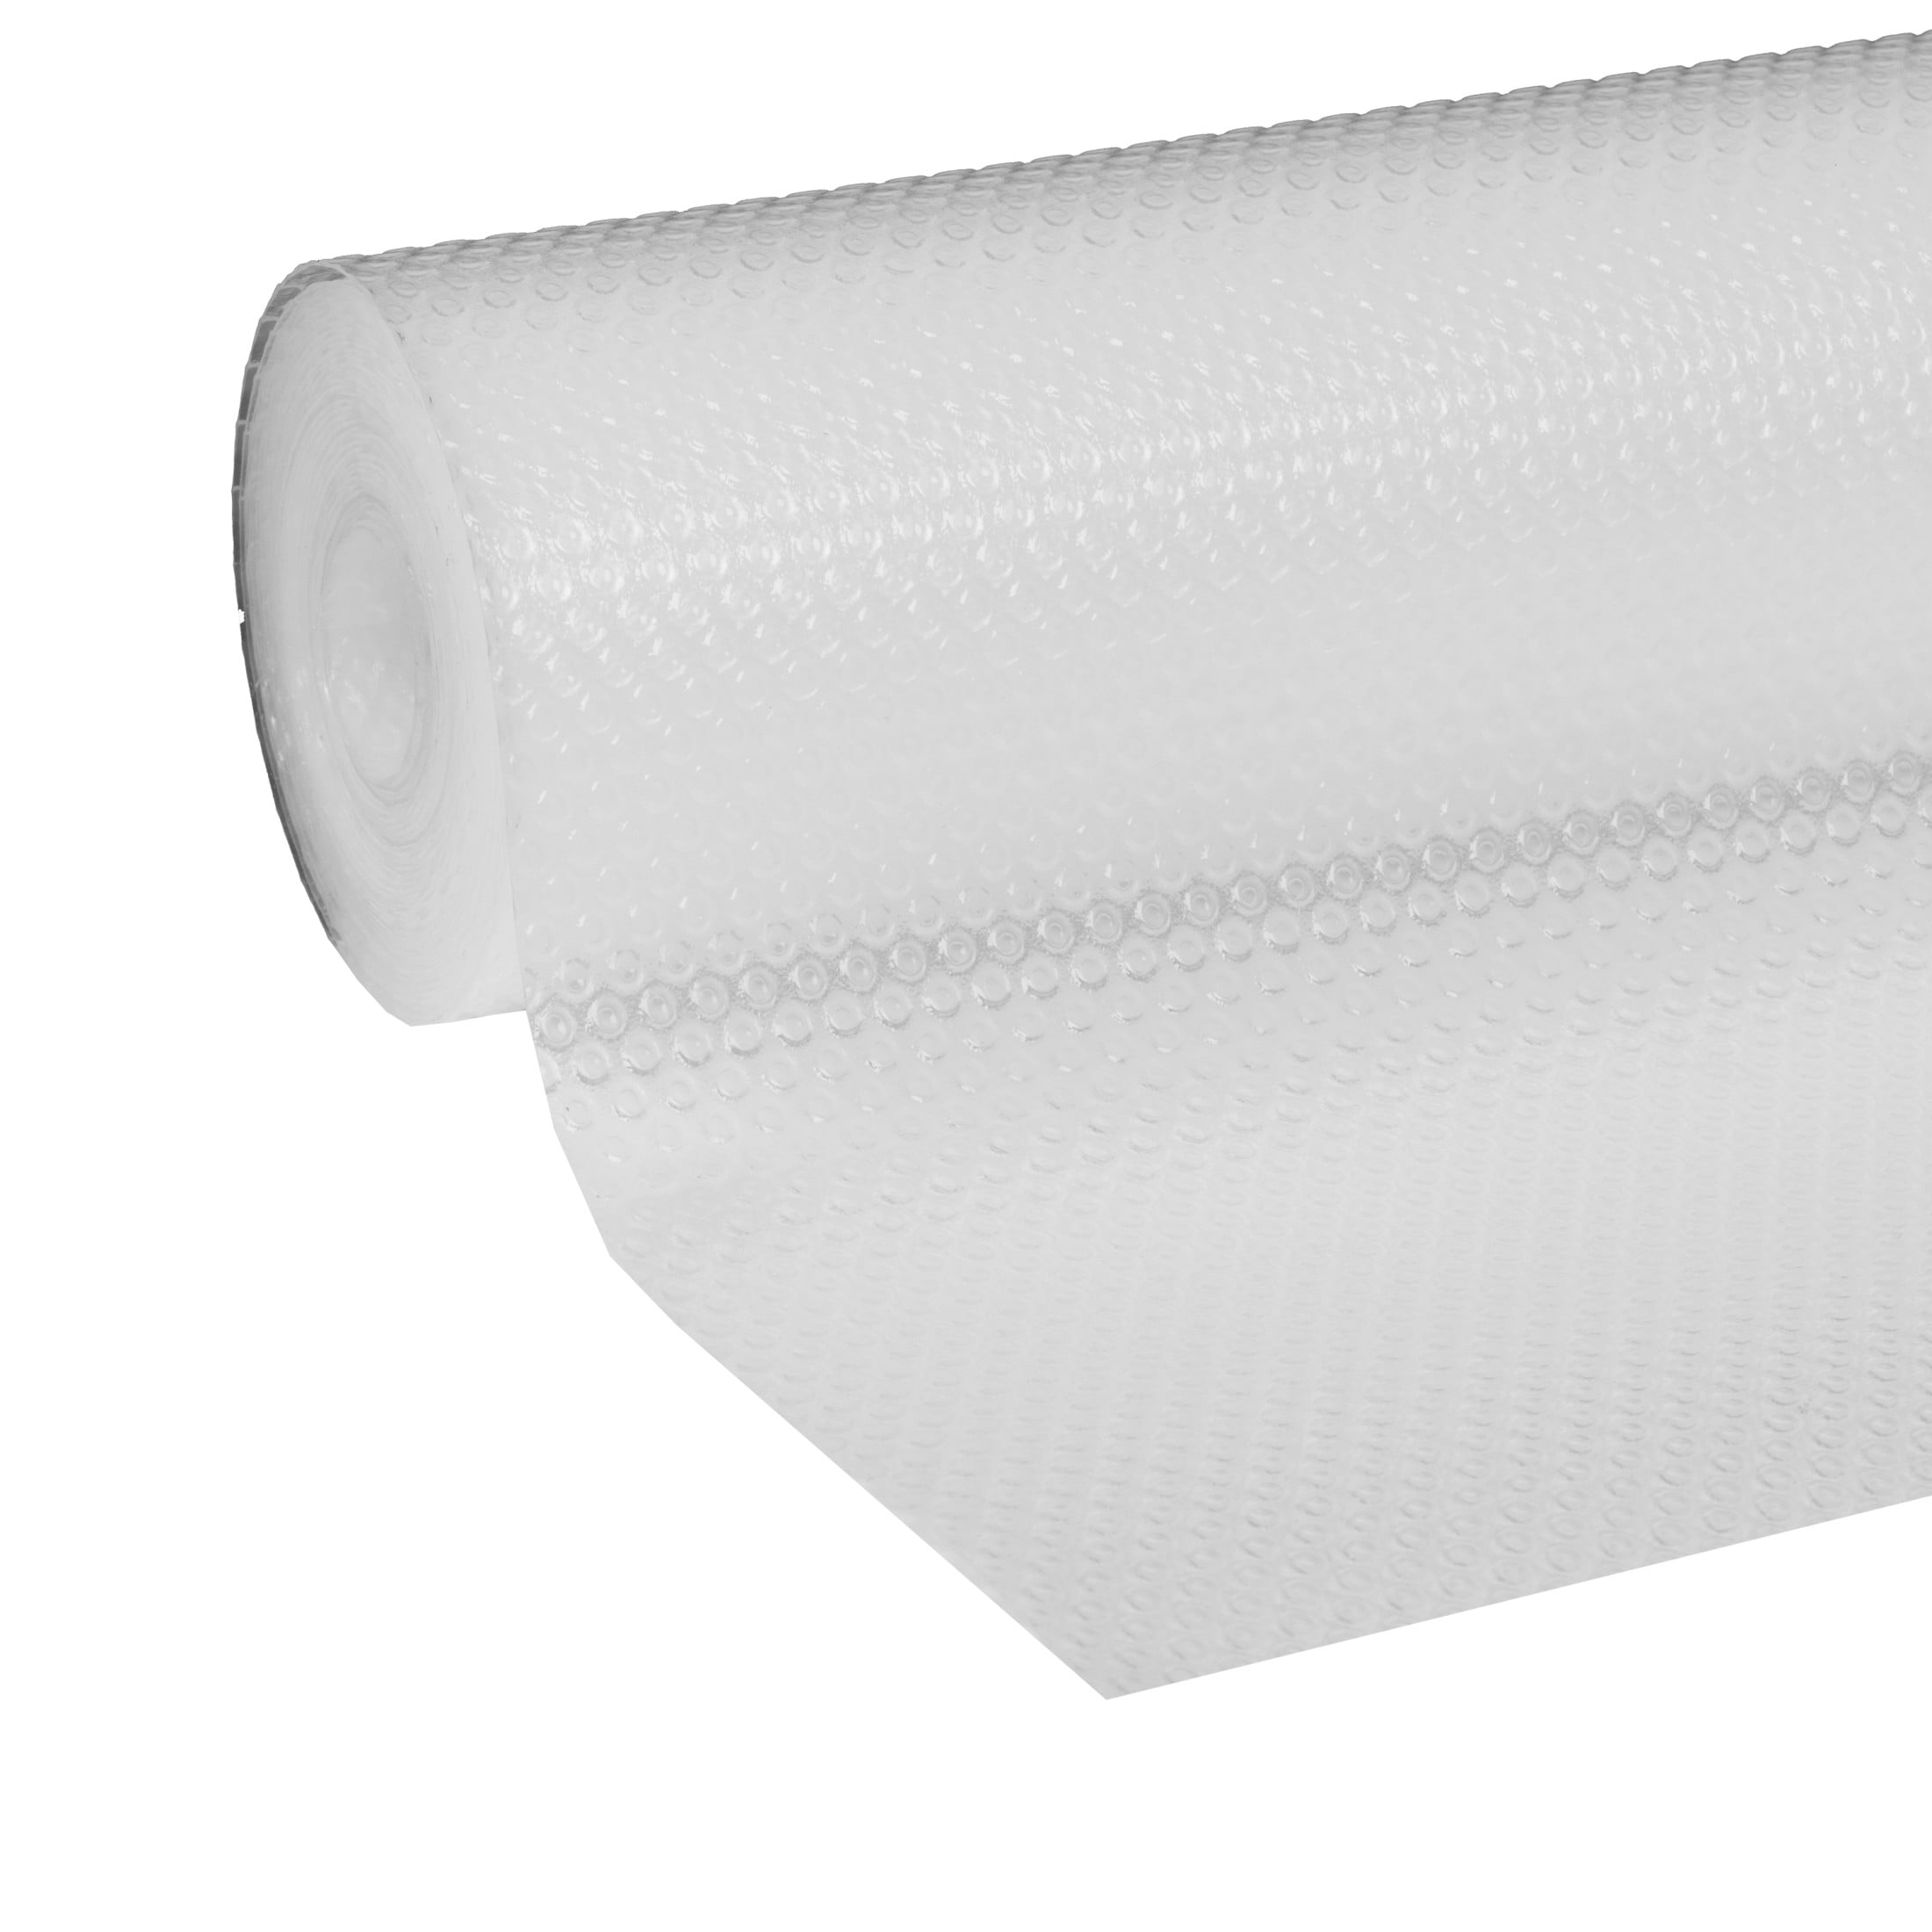 Duck Brand Clear Classic Easy Liner Shelf Liner, Non-Adhesive